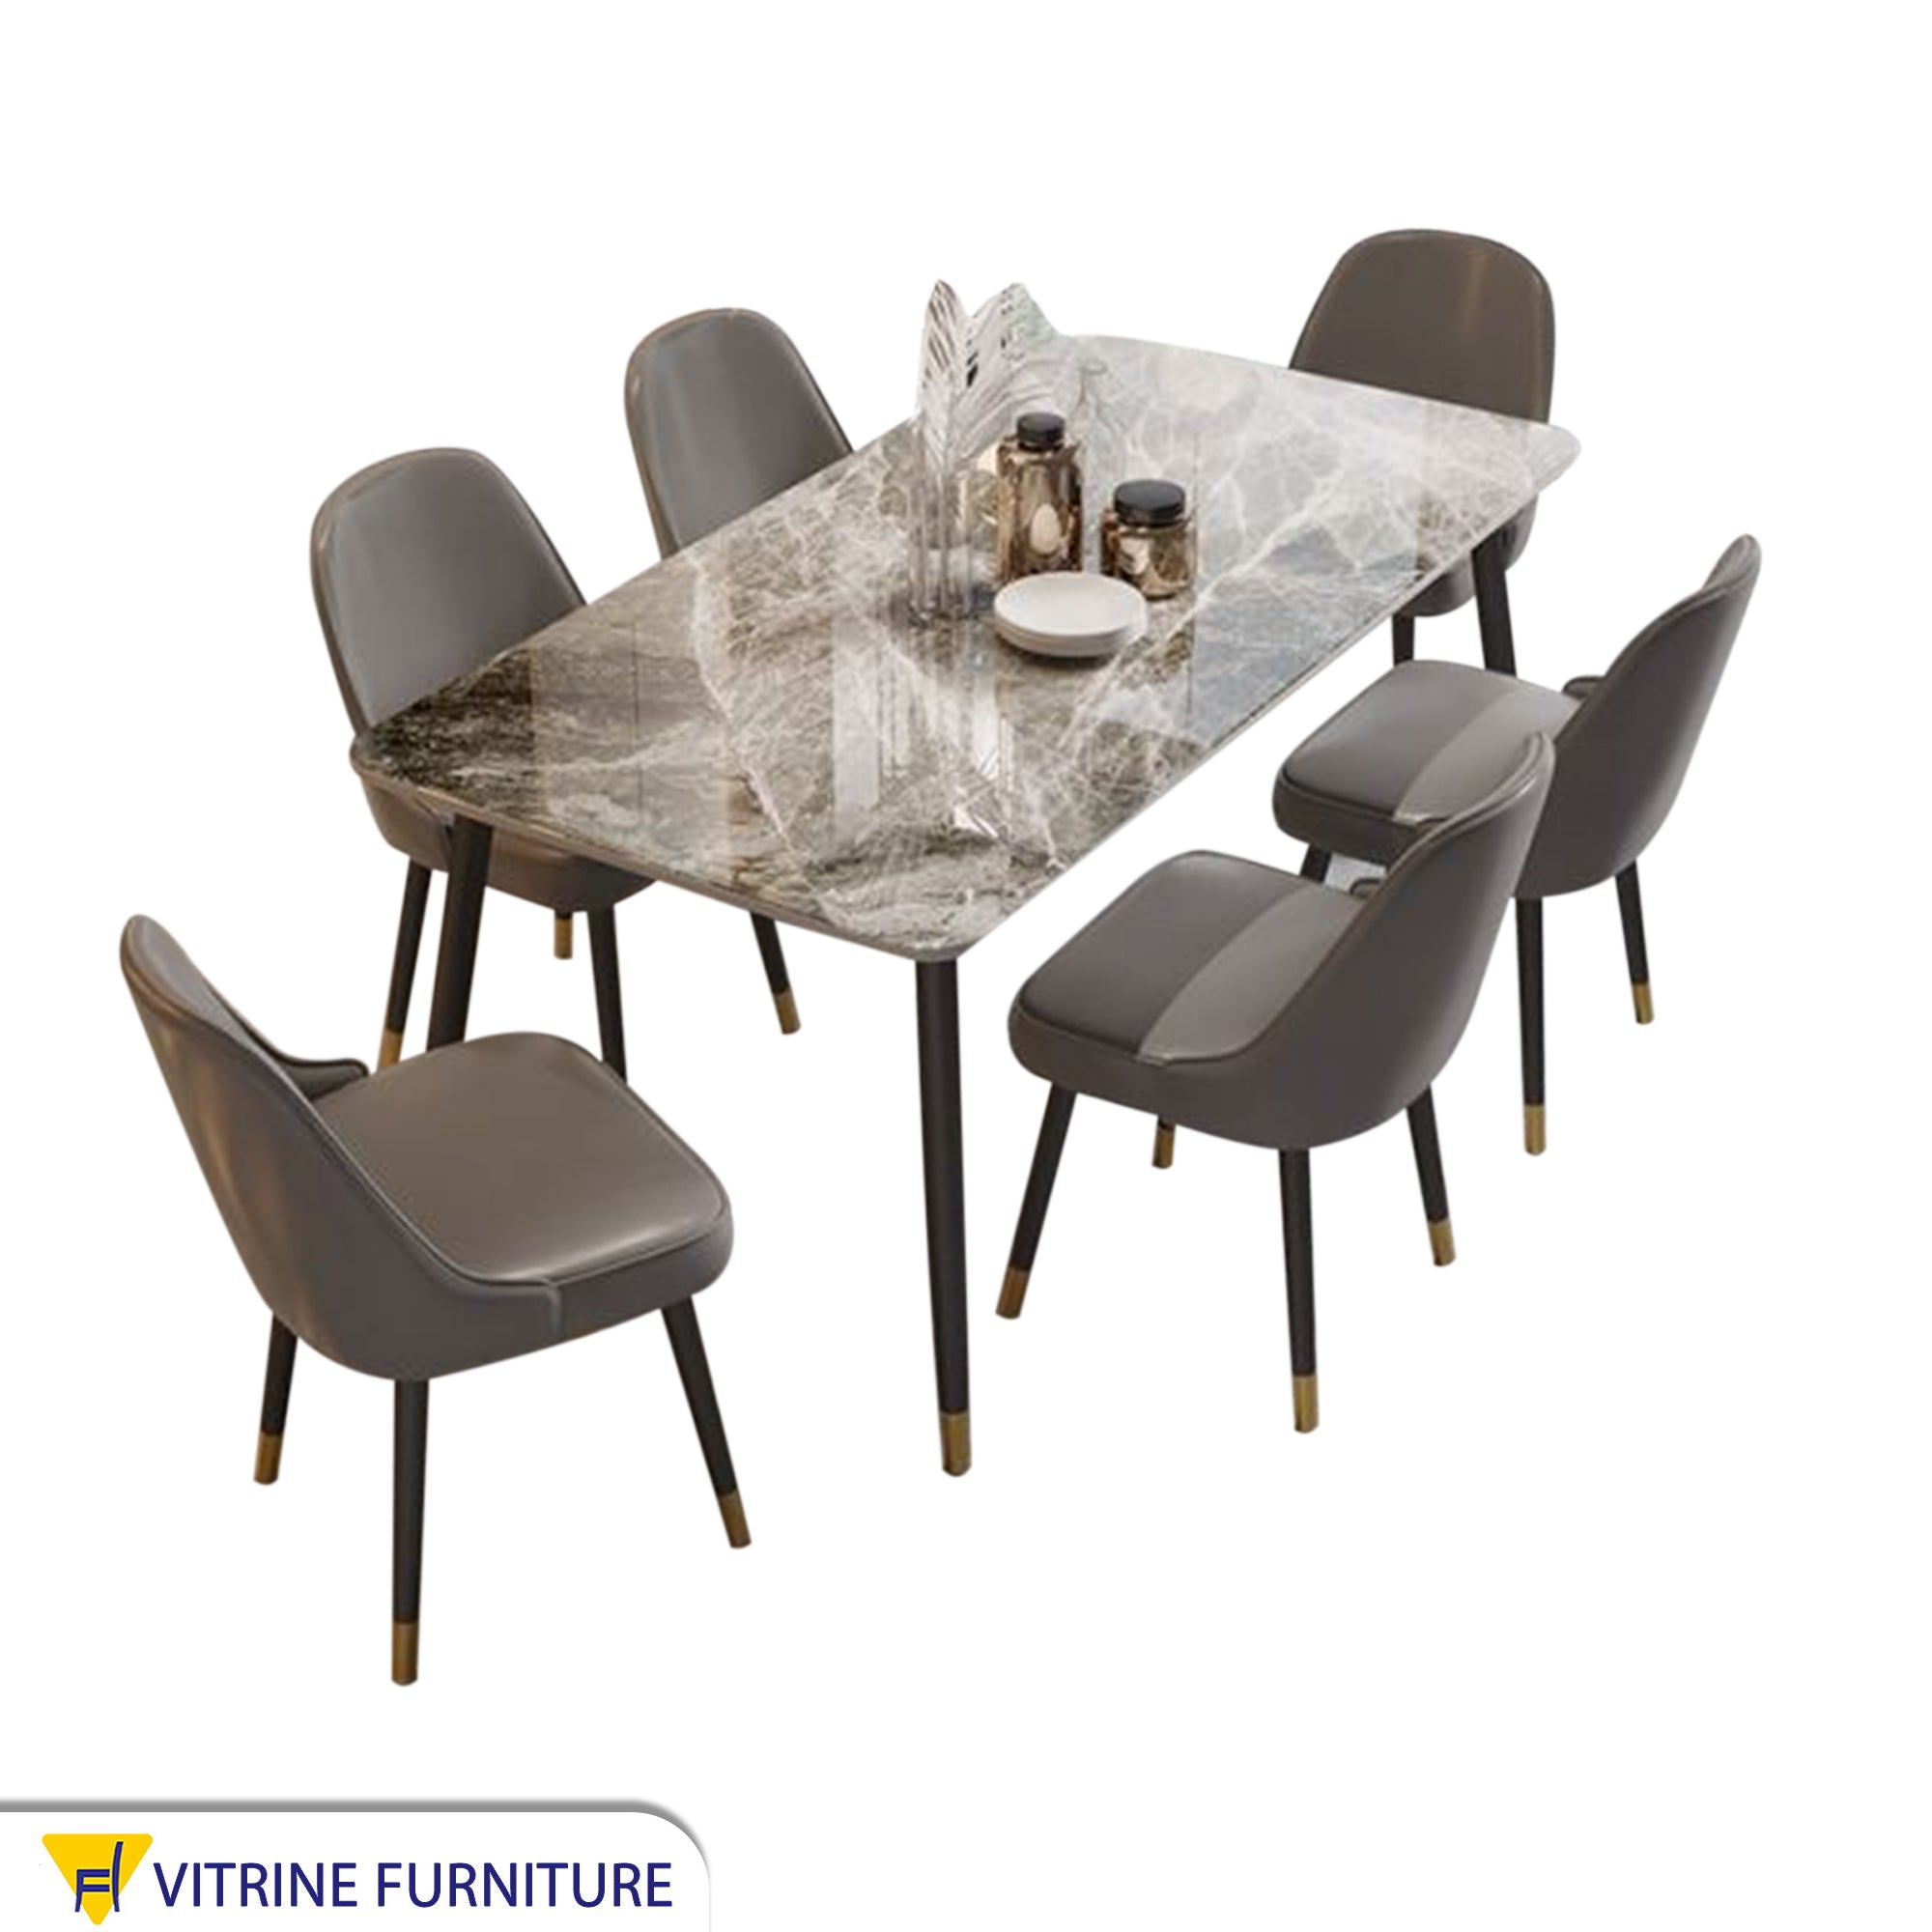 Dining table with 6 grey chairs